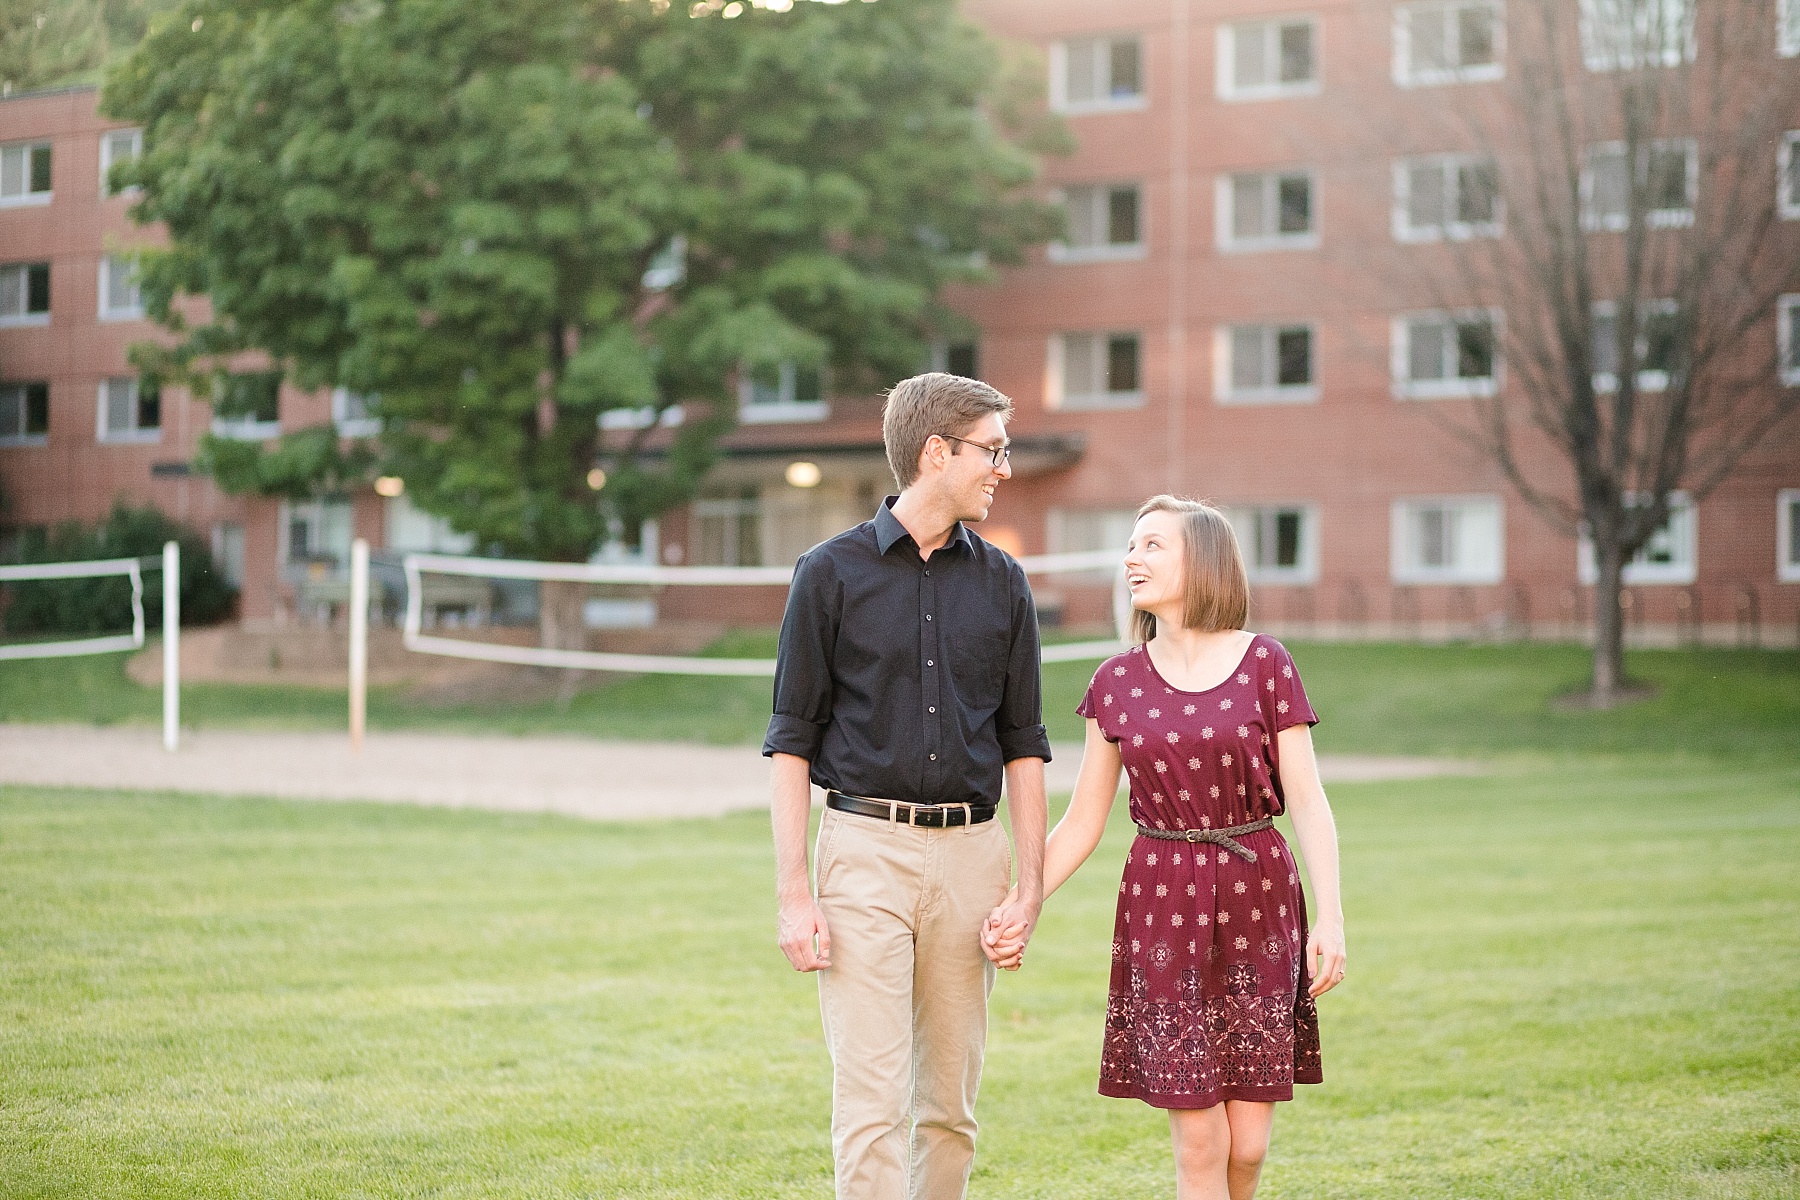 Bailey proposed to Jenna under the stars just steps away from where they first met at UW-Eau Claire at Putnam Park.  